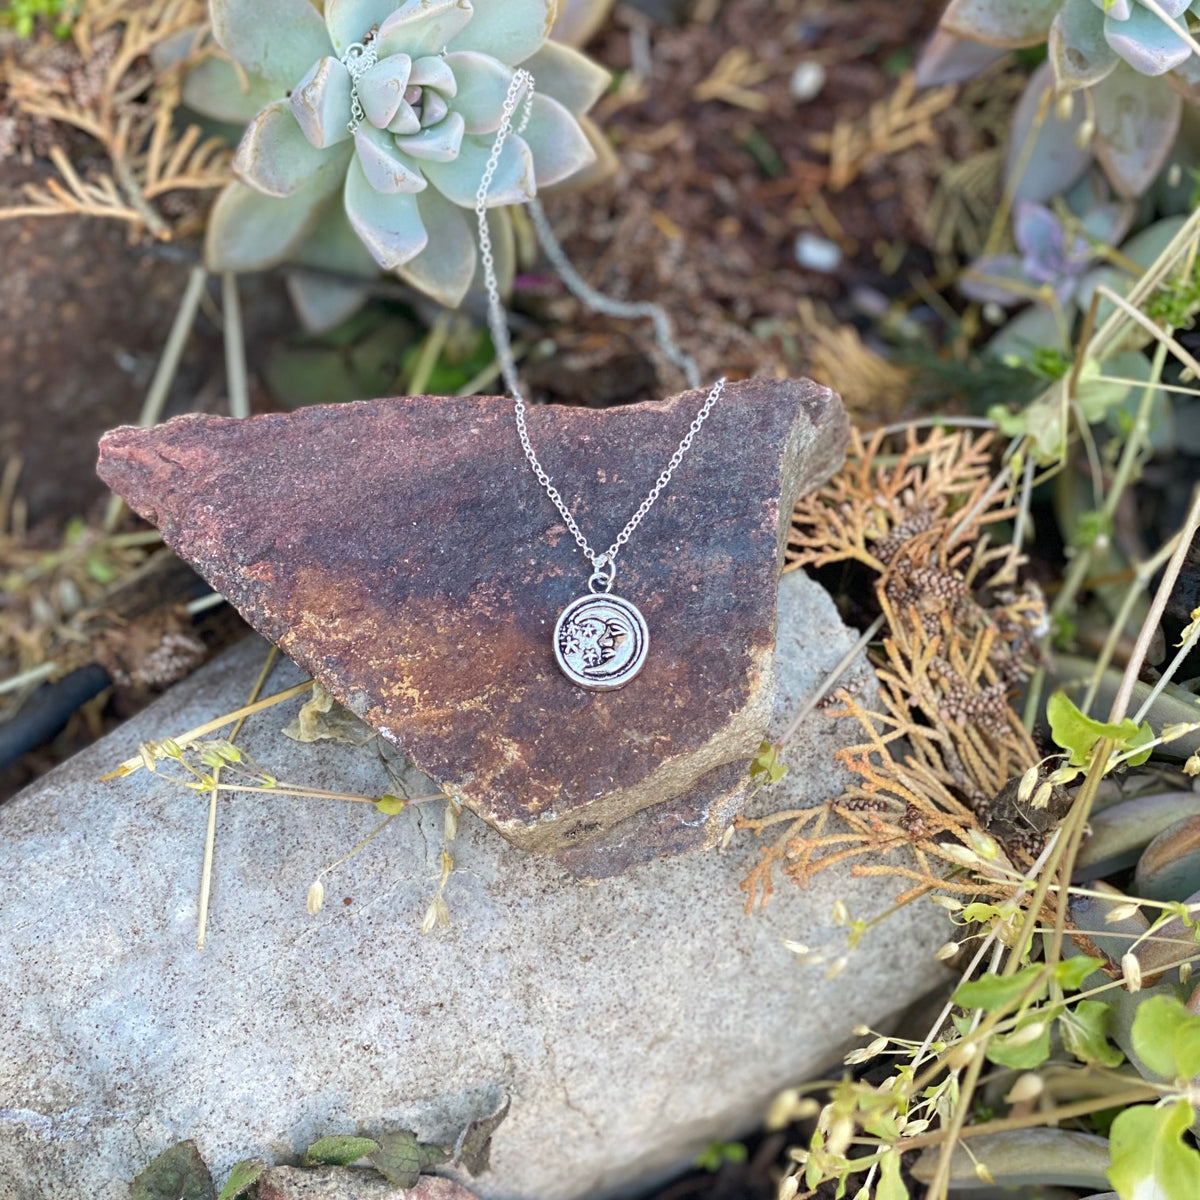 Moon Charm Necklace - Lunar Energy for Healing. Moonlight has holistic healing properties and is able to cleanse your mind, body, and spirit. Using the lunar energy of the moon can yield incredible healing results, both physically and mentally.